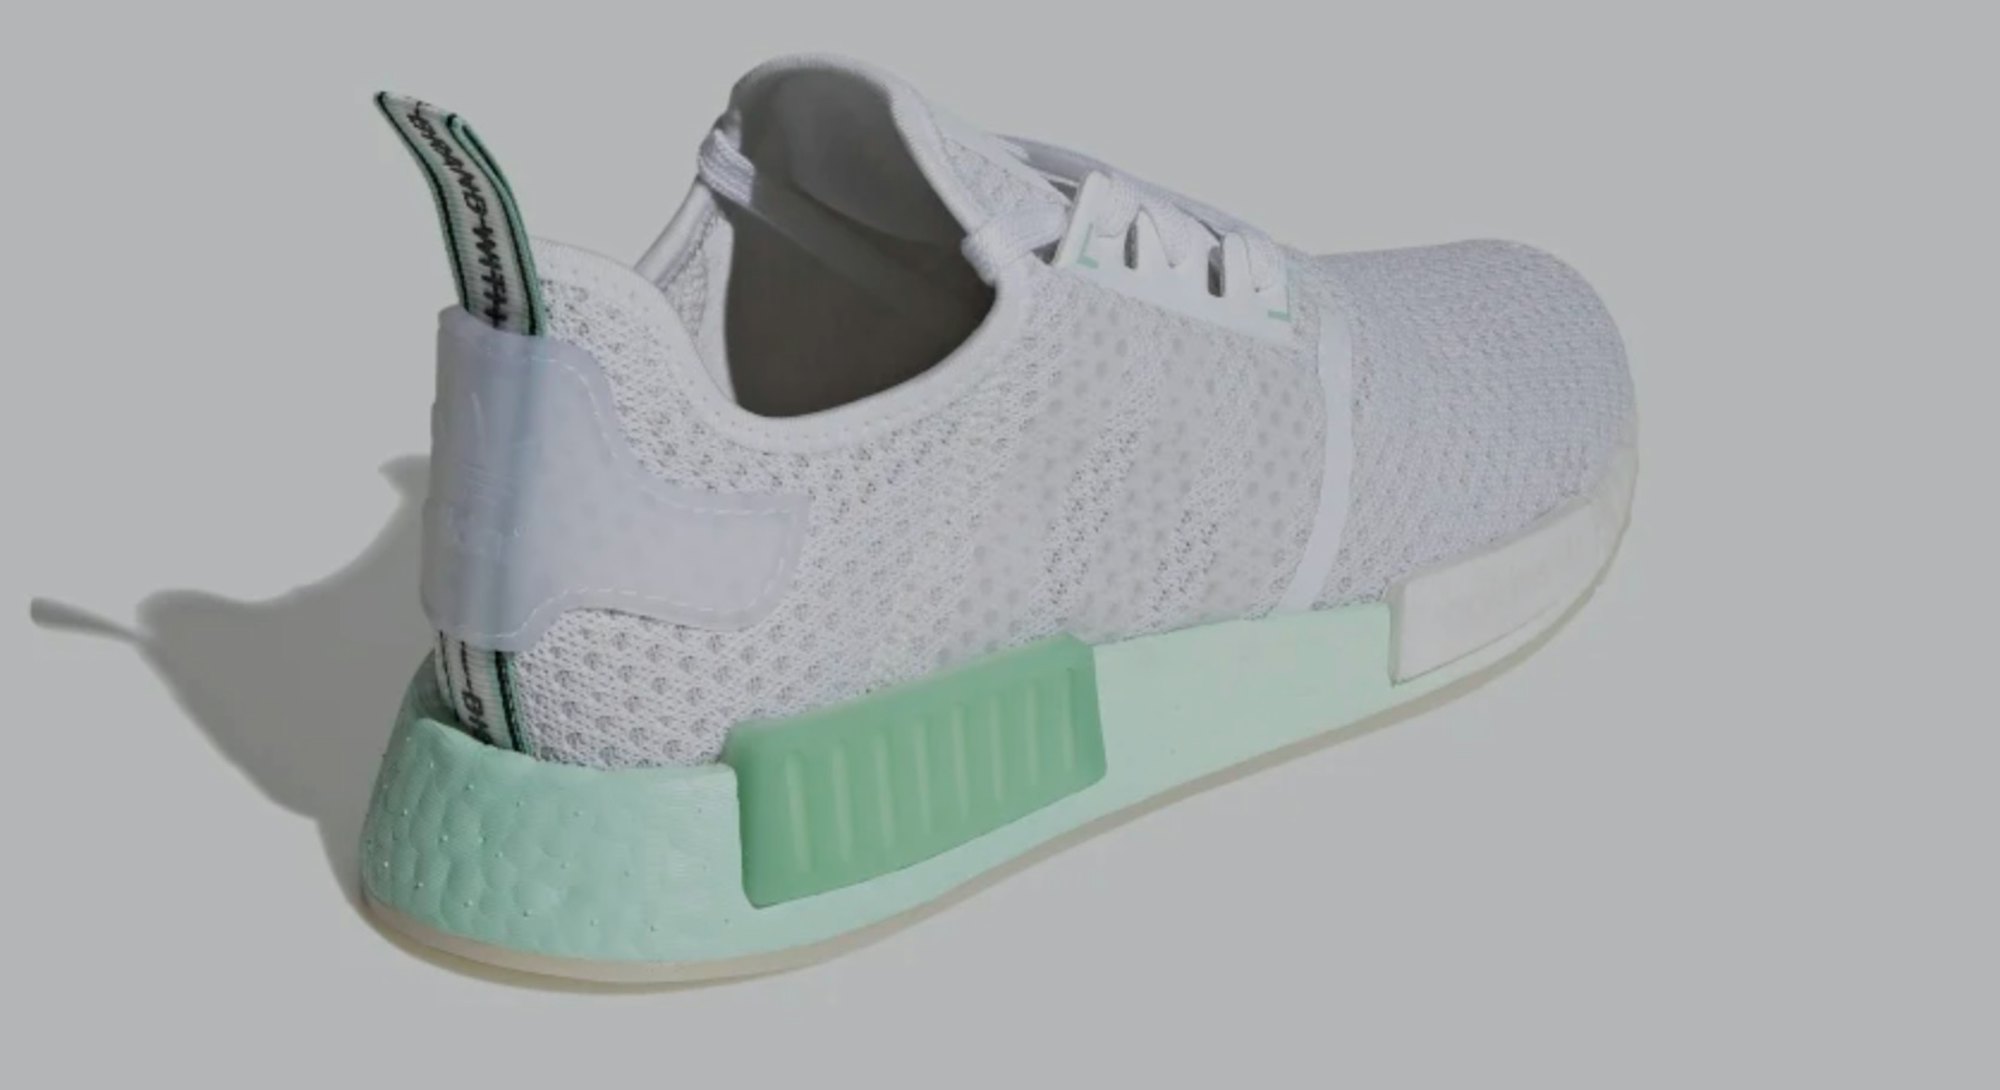 Adidas NMD shoes